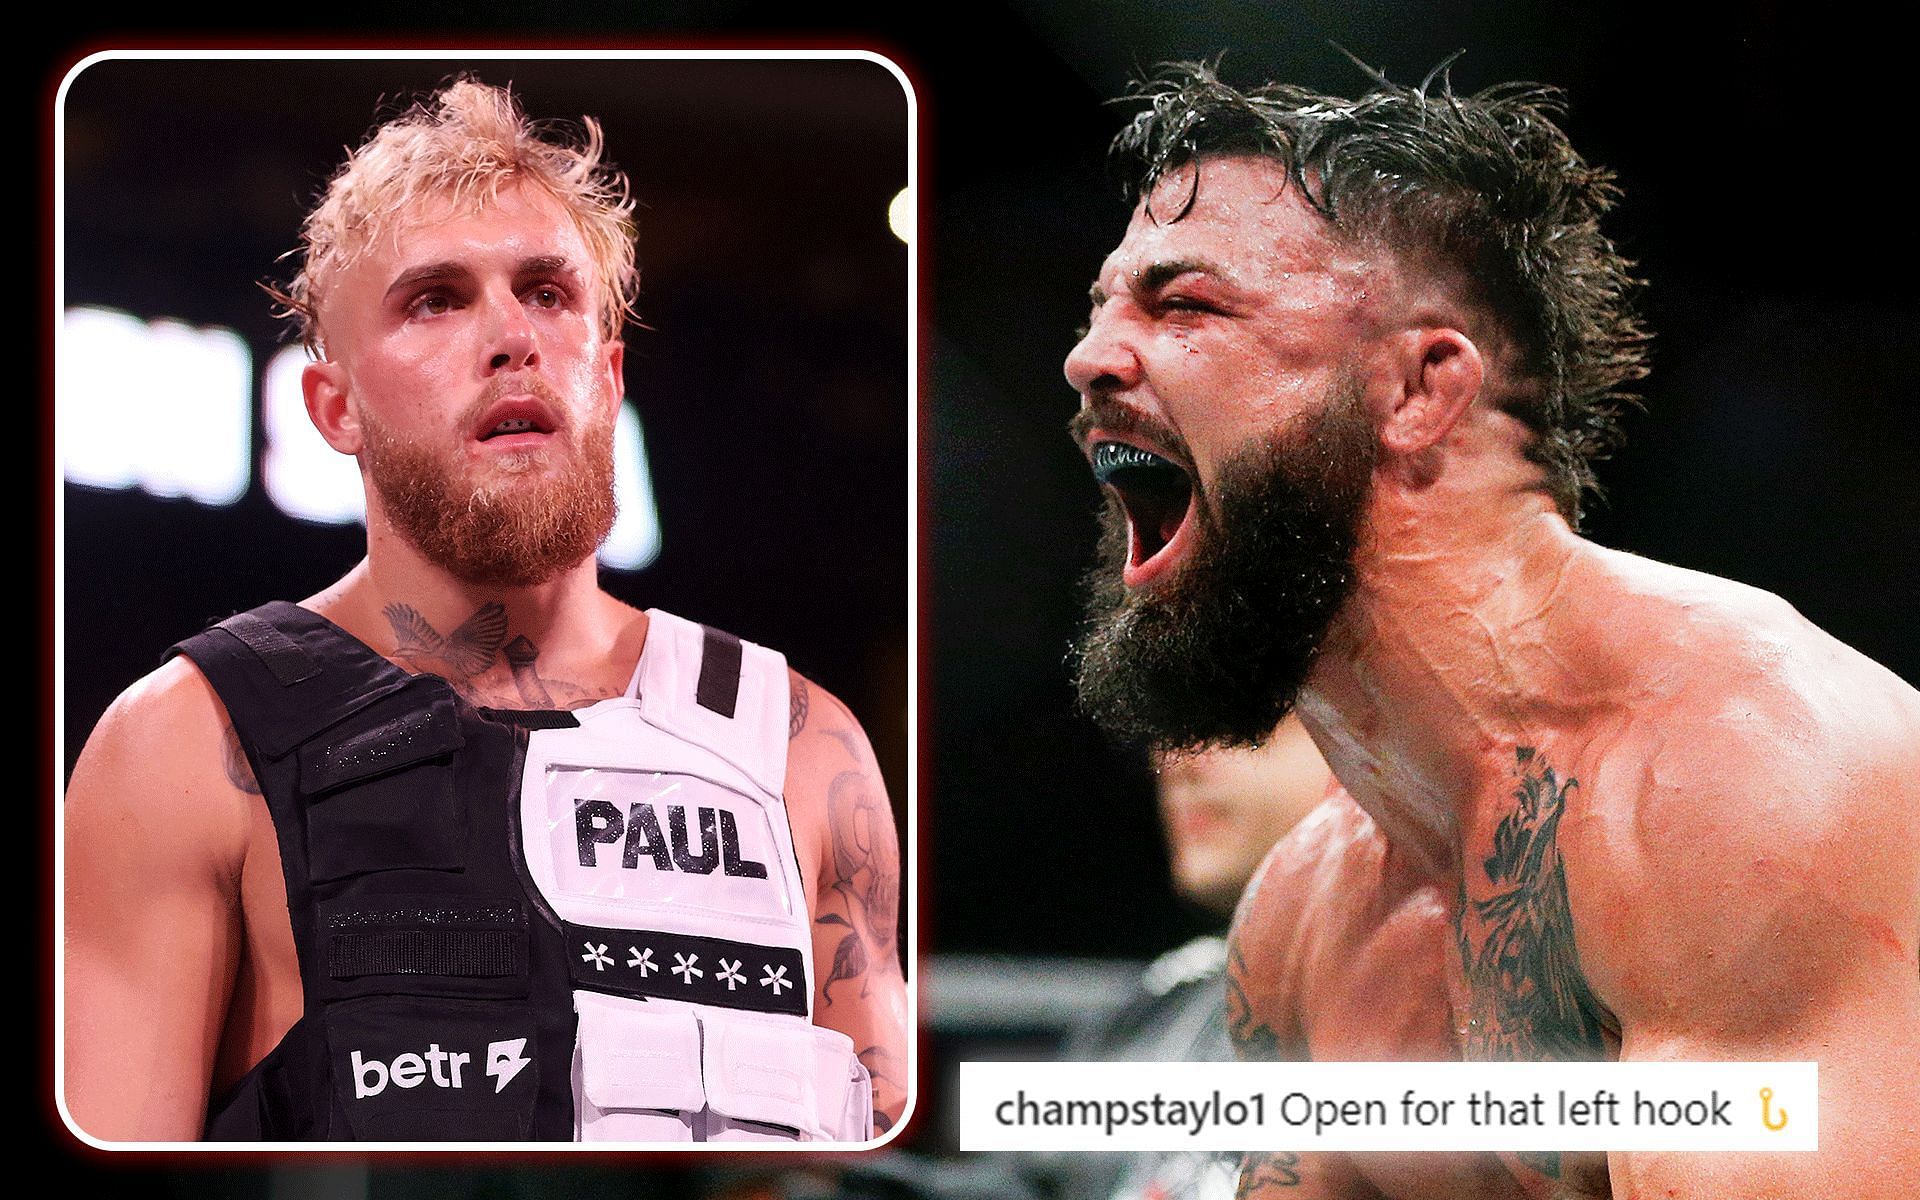 Fans are concerned after Mike Perry (right) recent sparring video hits the internet. [Image courtesy: Getty Images]